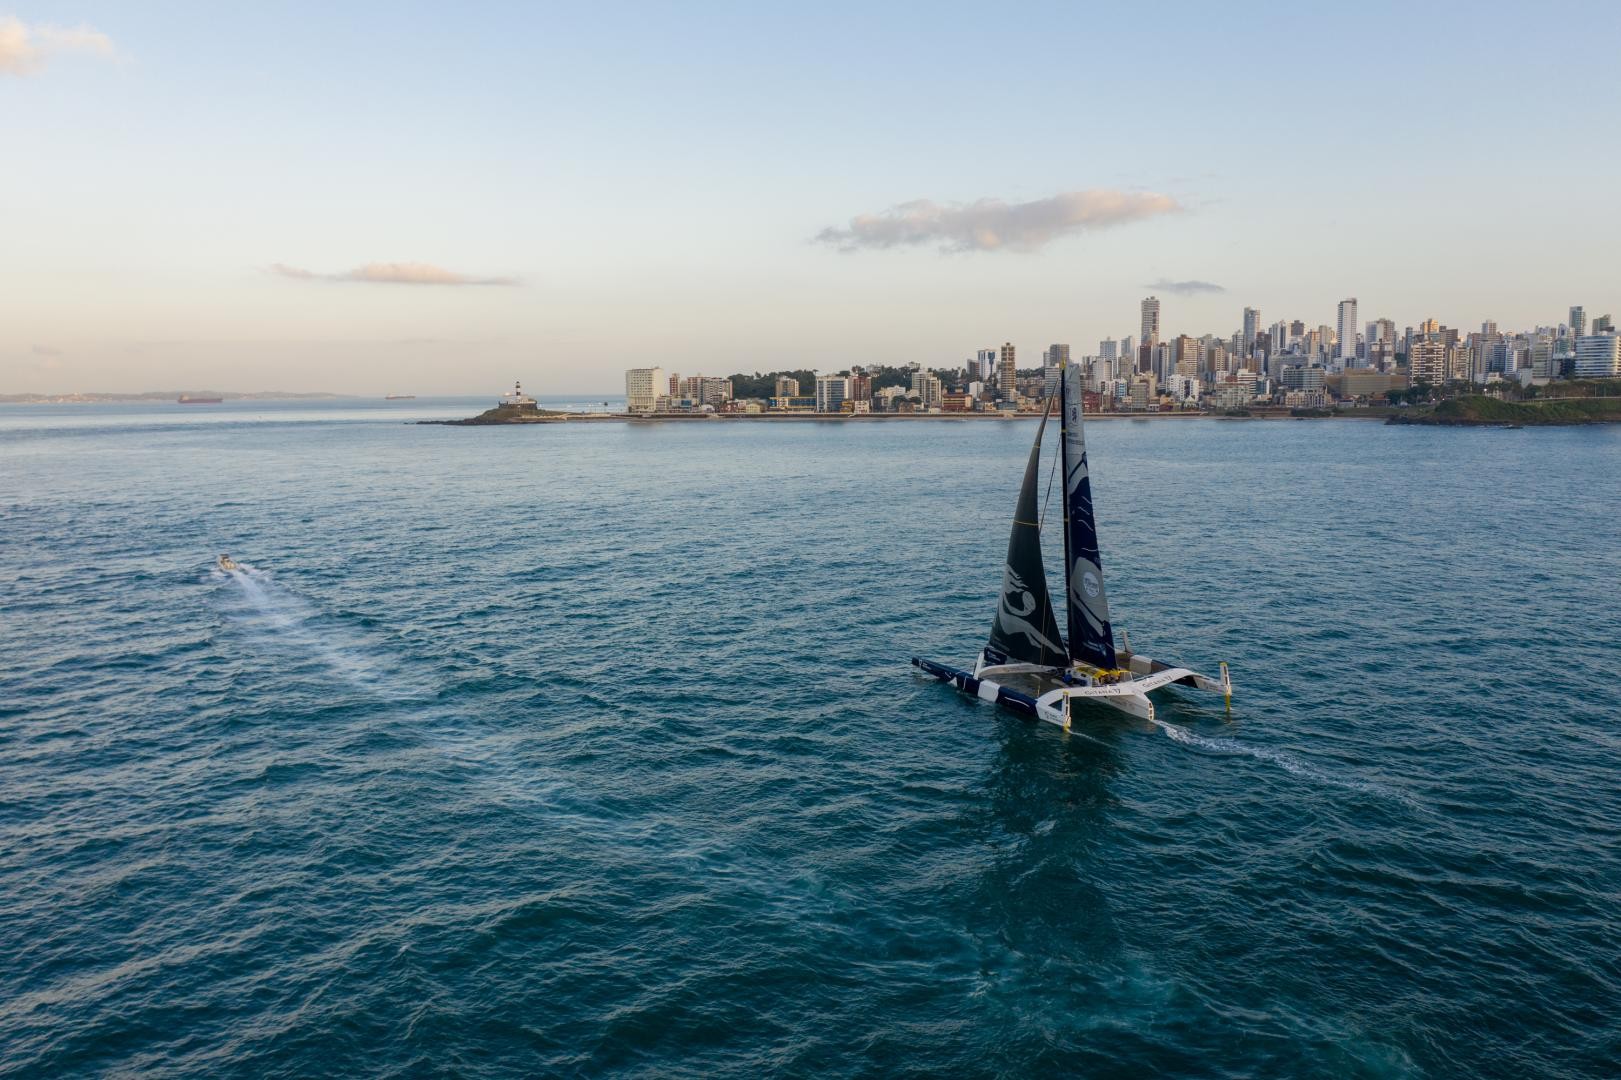 Sébastien Josse Analyses the Race – Heading for an upwind crossing from Rio to Cape Town